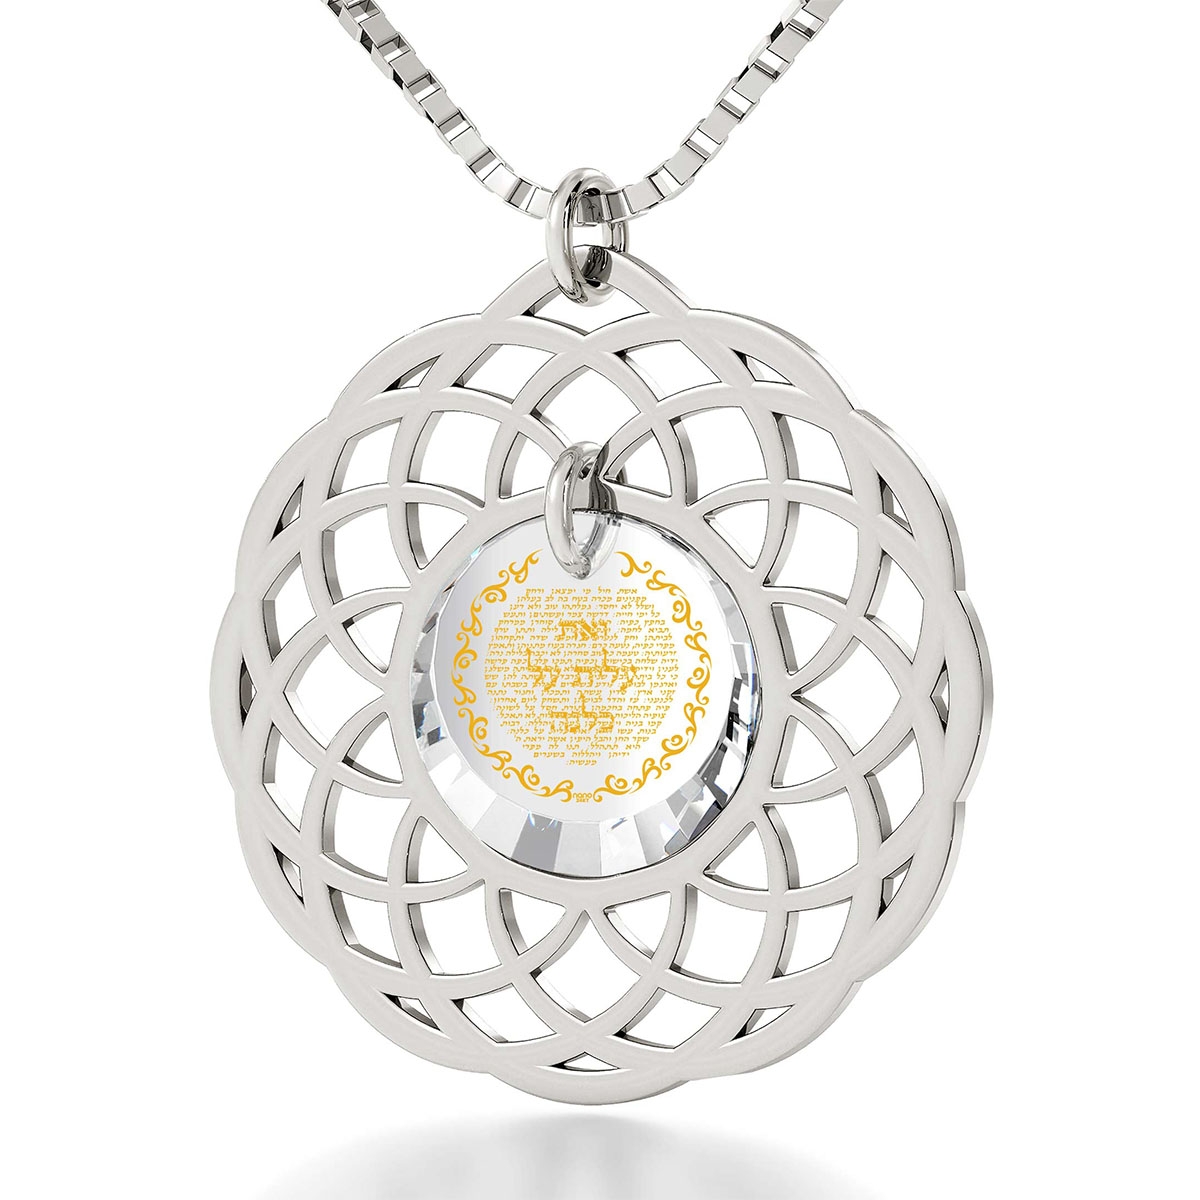 925 Sterling Silver and Cubic Zirconia Eishet Chayil (Woman of Valor) Necklace Micro-Inscribed with 24K Gold (Proverbs 31:10-31) - 1